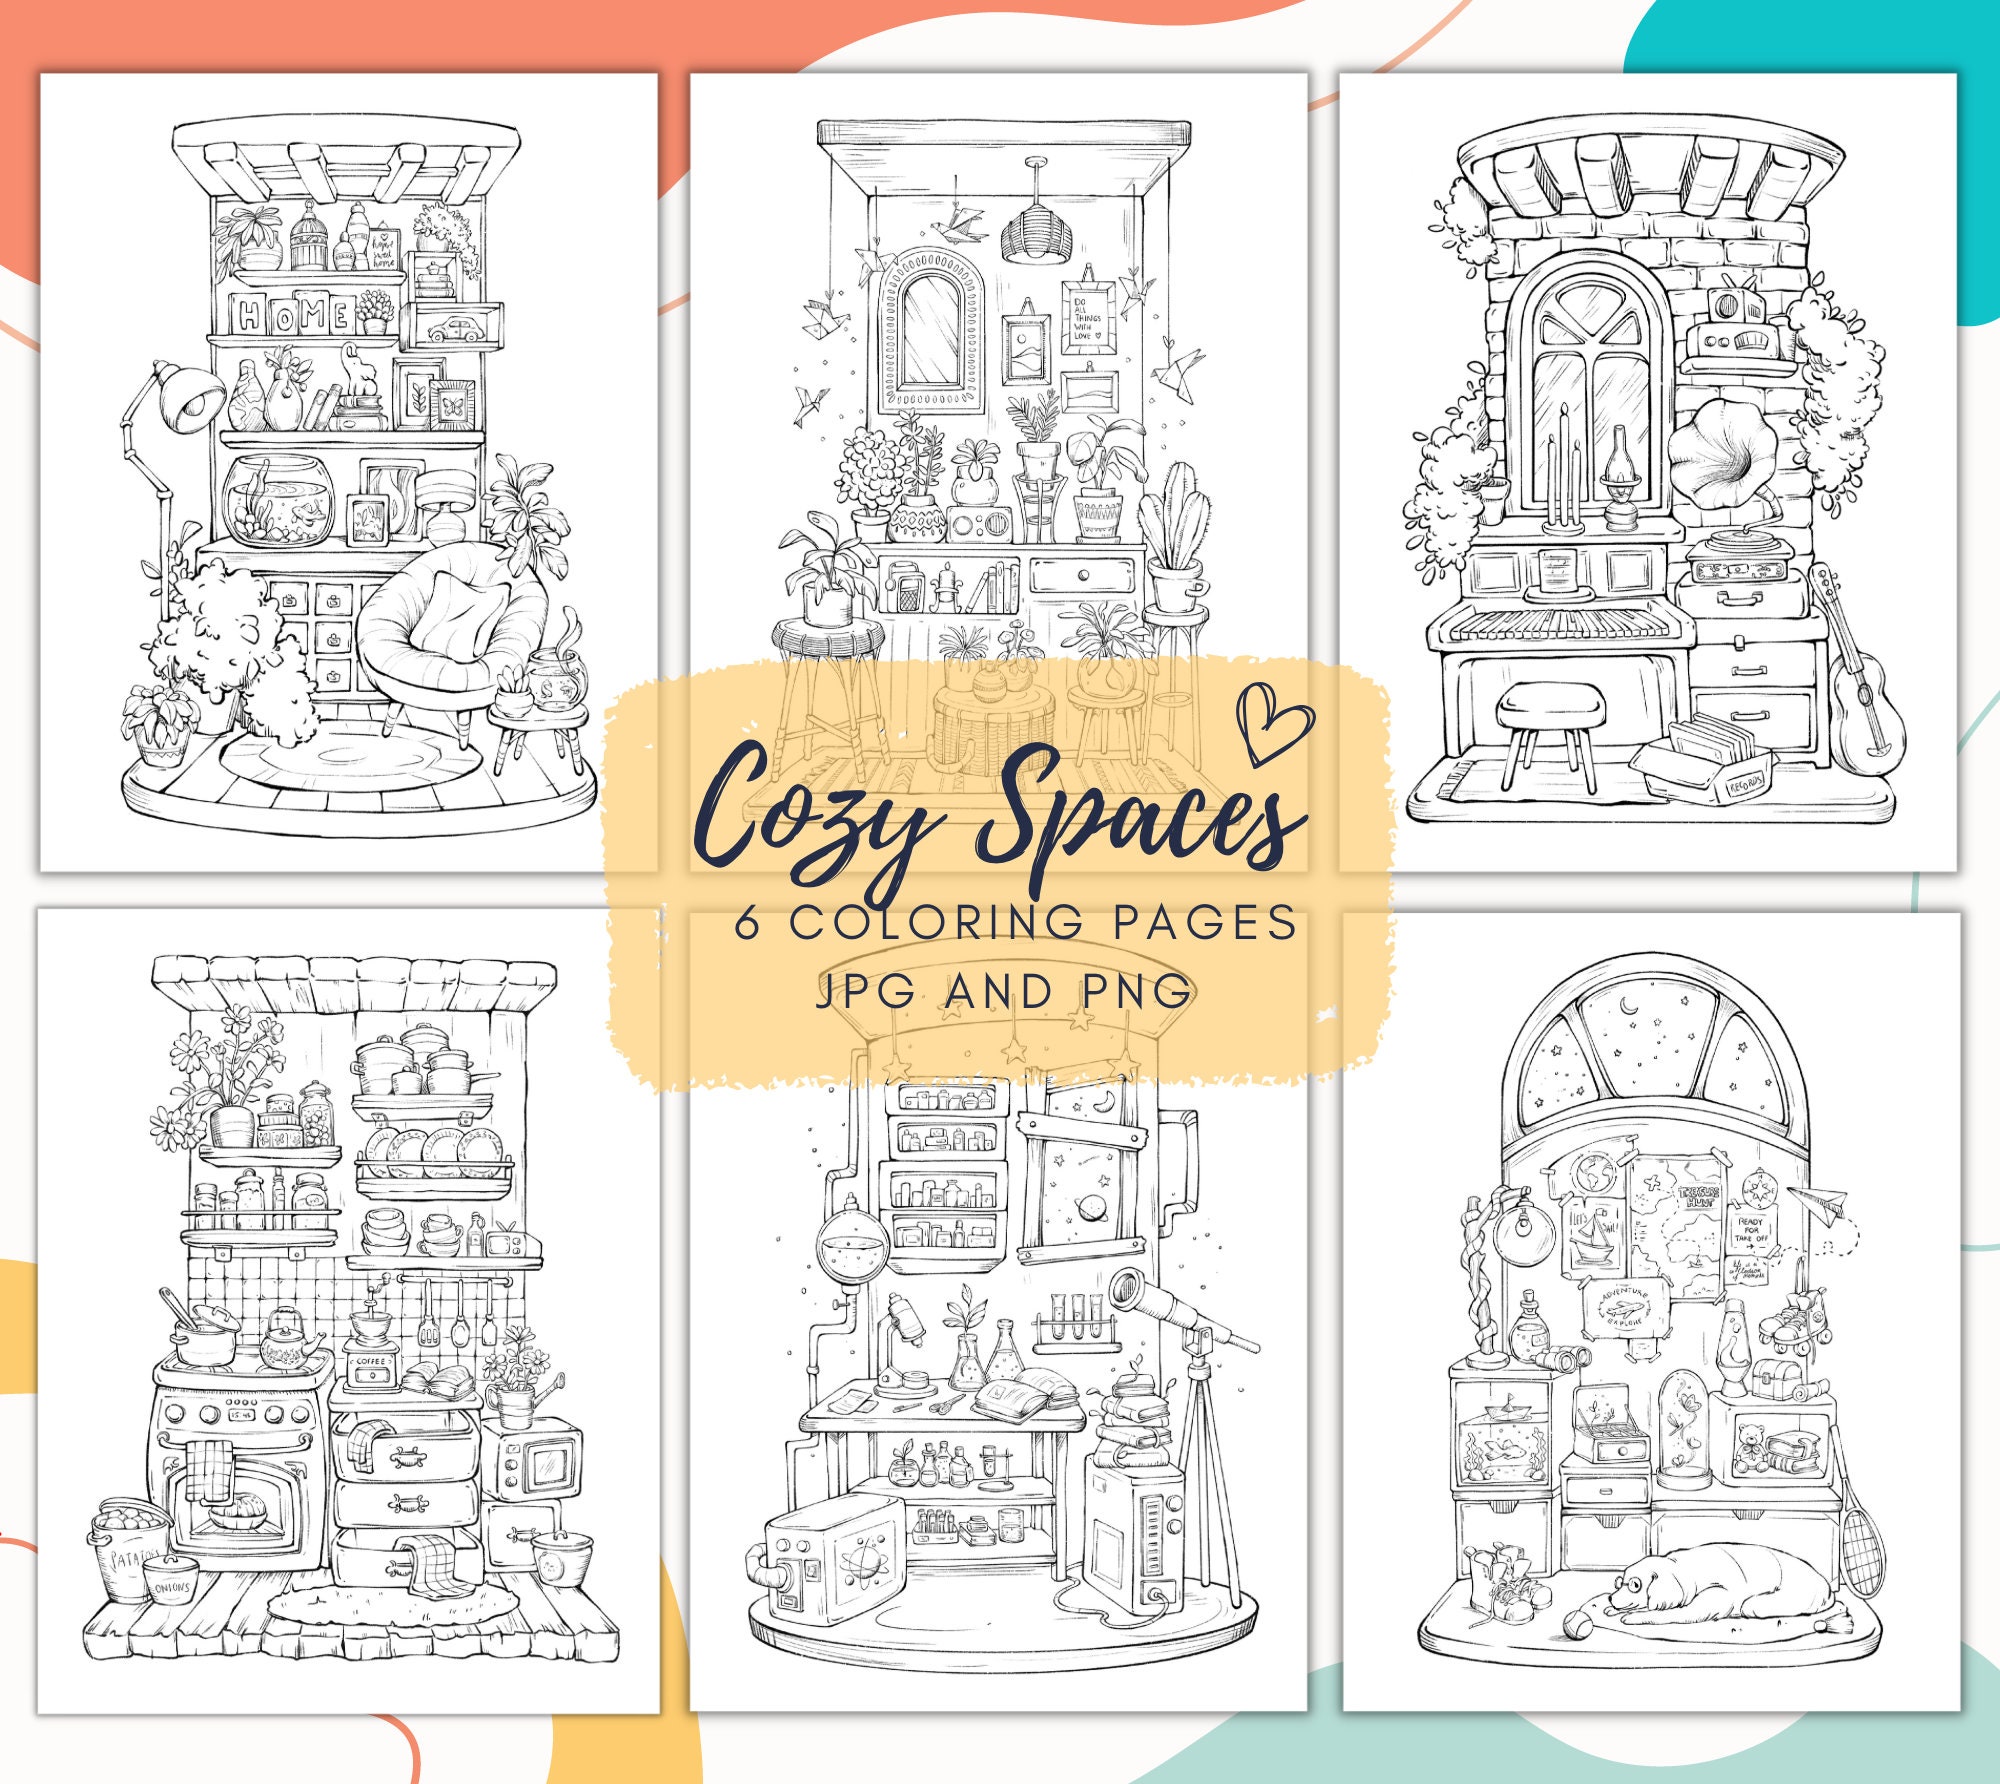 Creative Spaces: Coloring Nook Inspiration - Cleverpedia